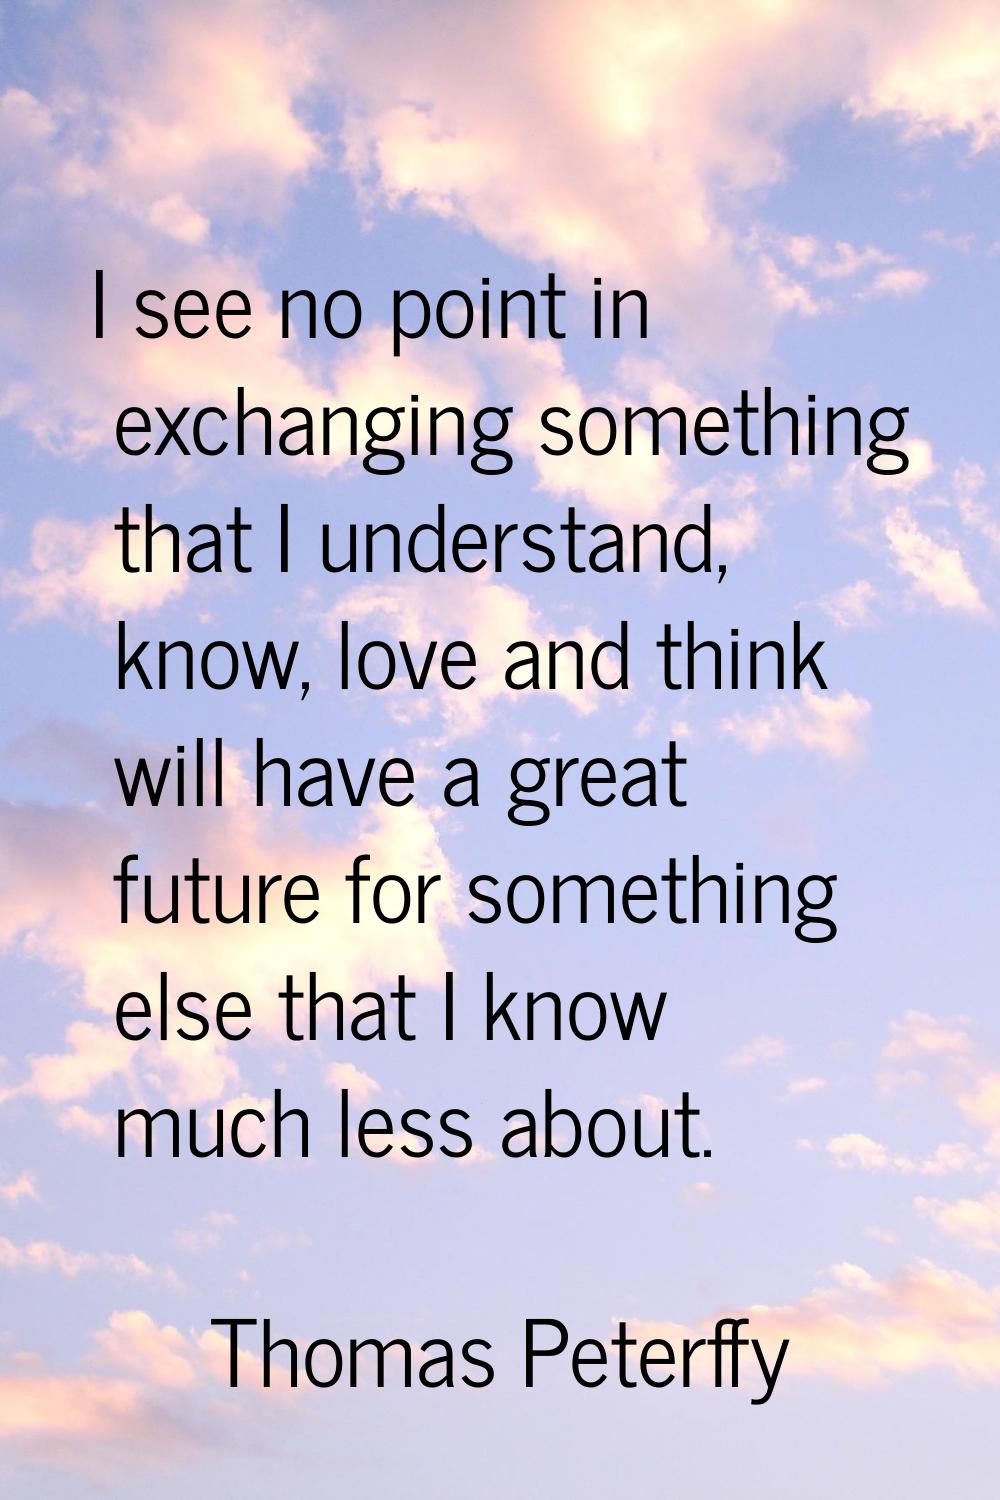 I see no point in exchanging something that I understand, know, love and think will have a great fu